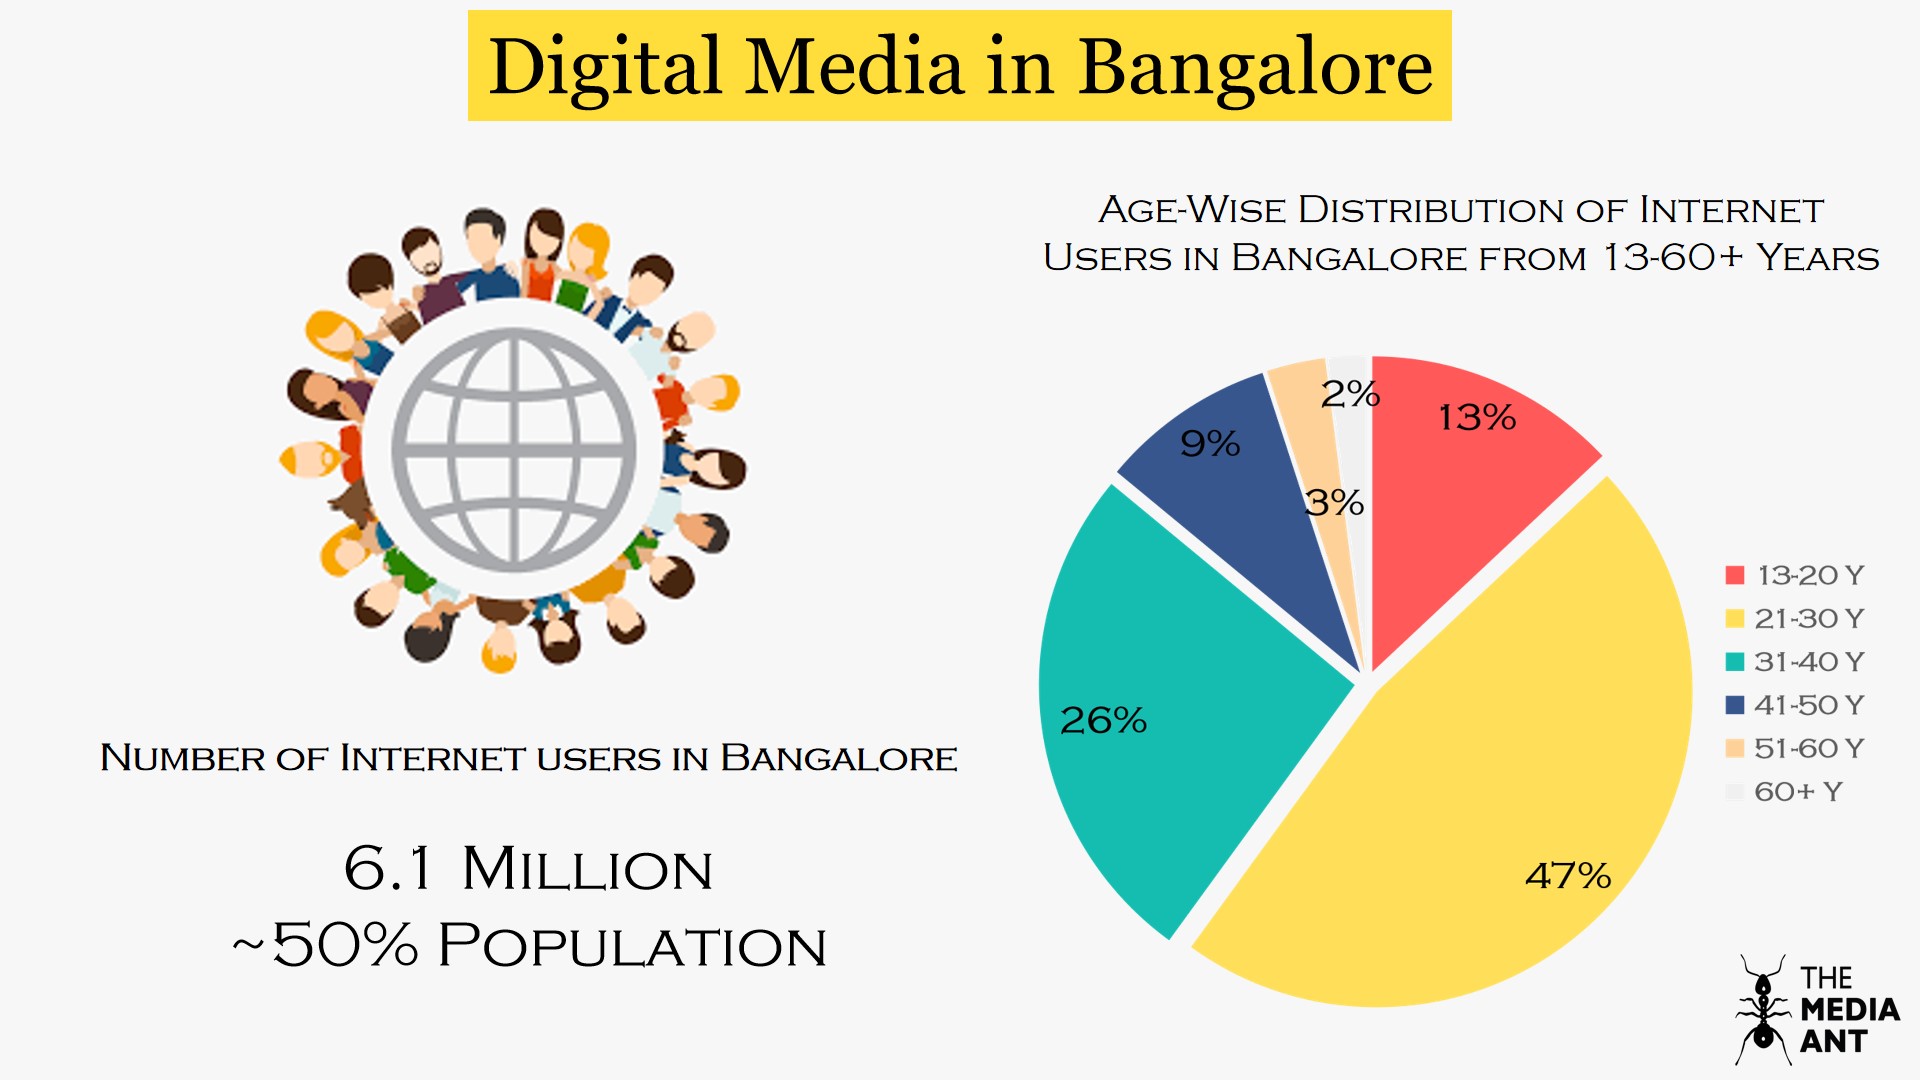 Internet users in Bangalore